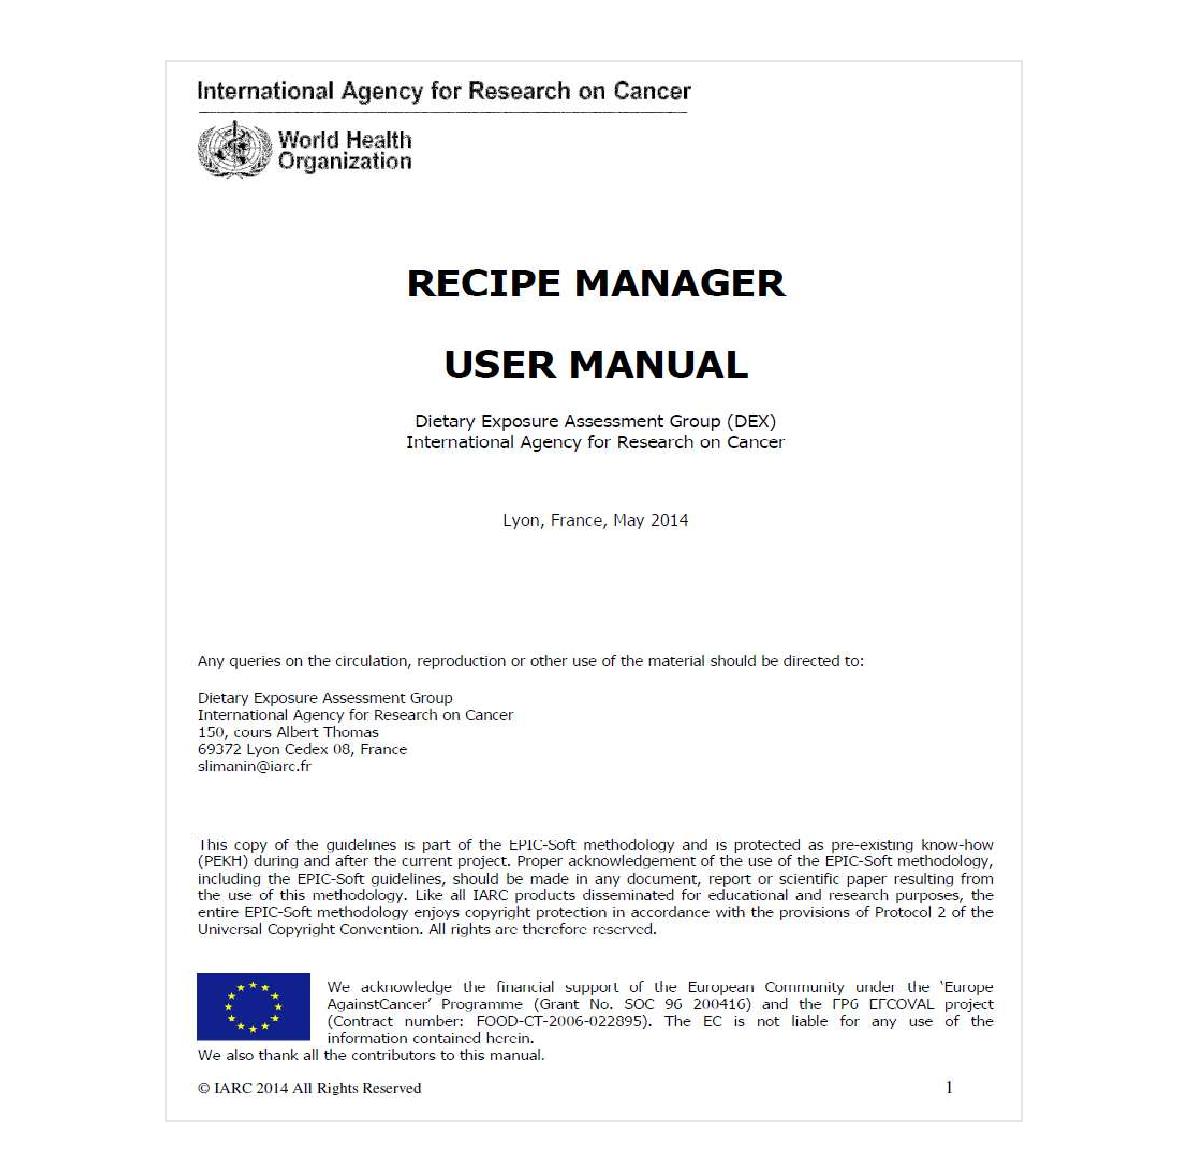 GloboDiet (EPIC-Soft) Recipe Manager User’s Manual